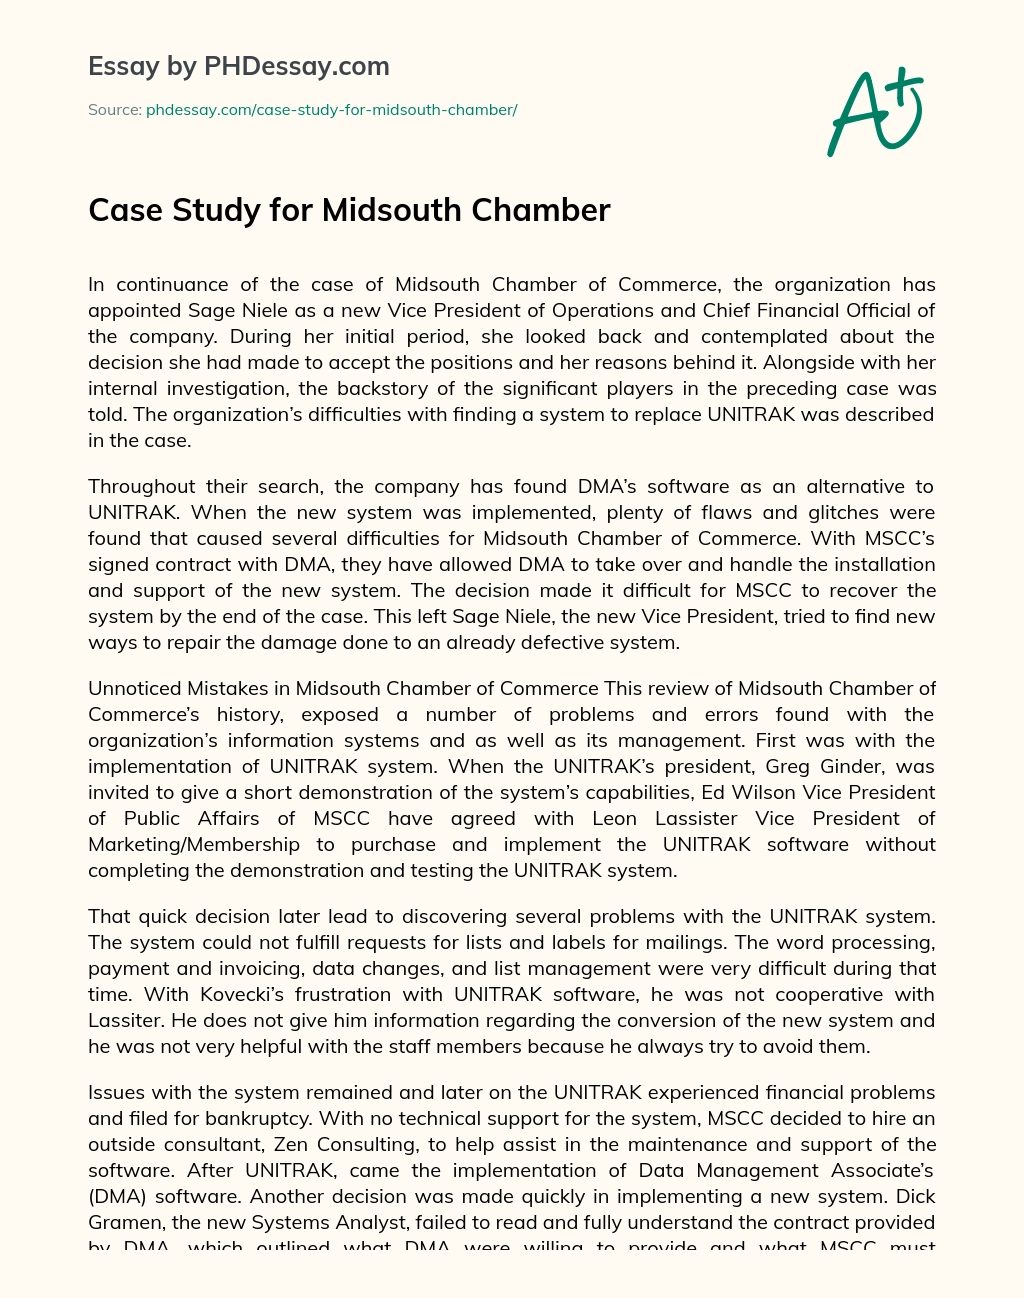 Case Study for Midsouth Chamber essay